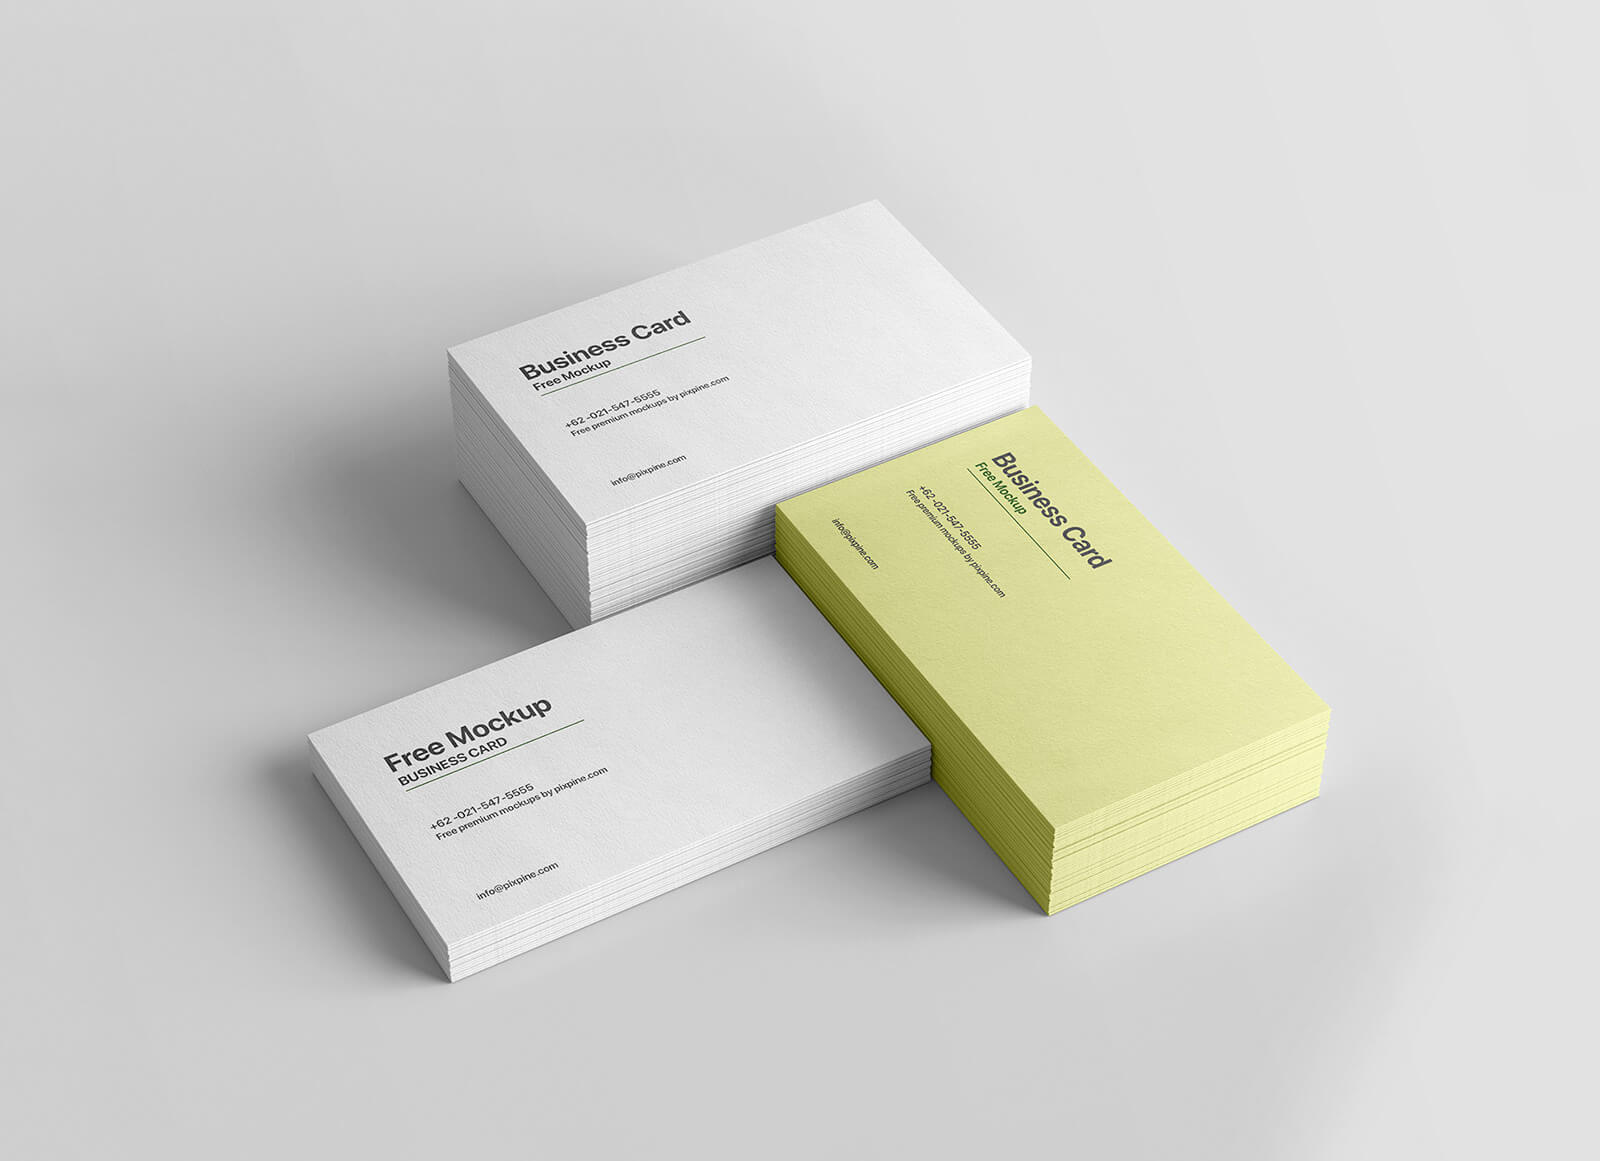 Free-Stacked-Textured-Business-Card-Mockup-PSD